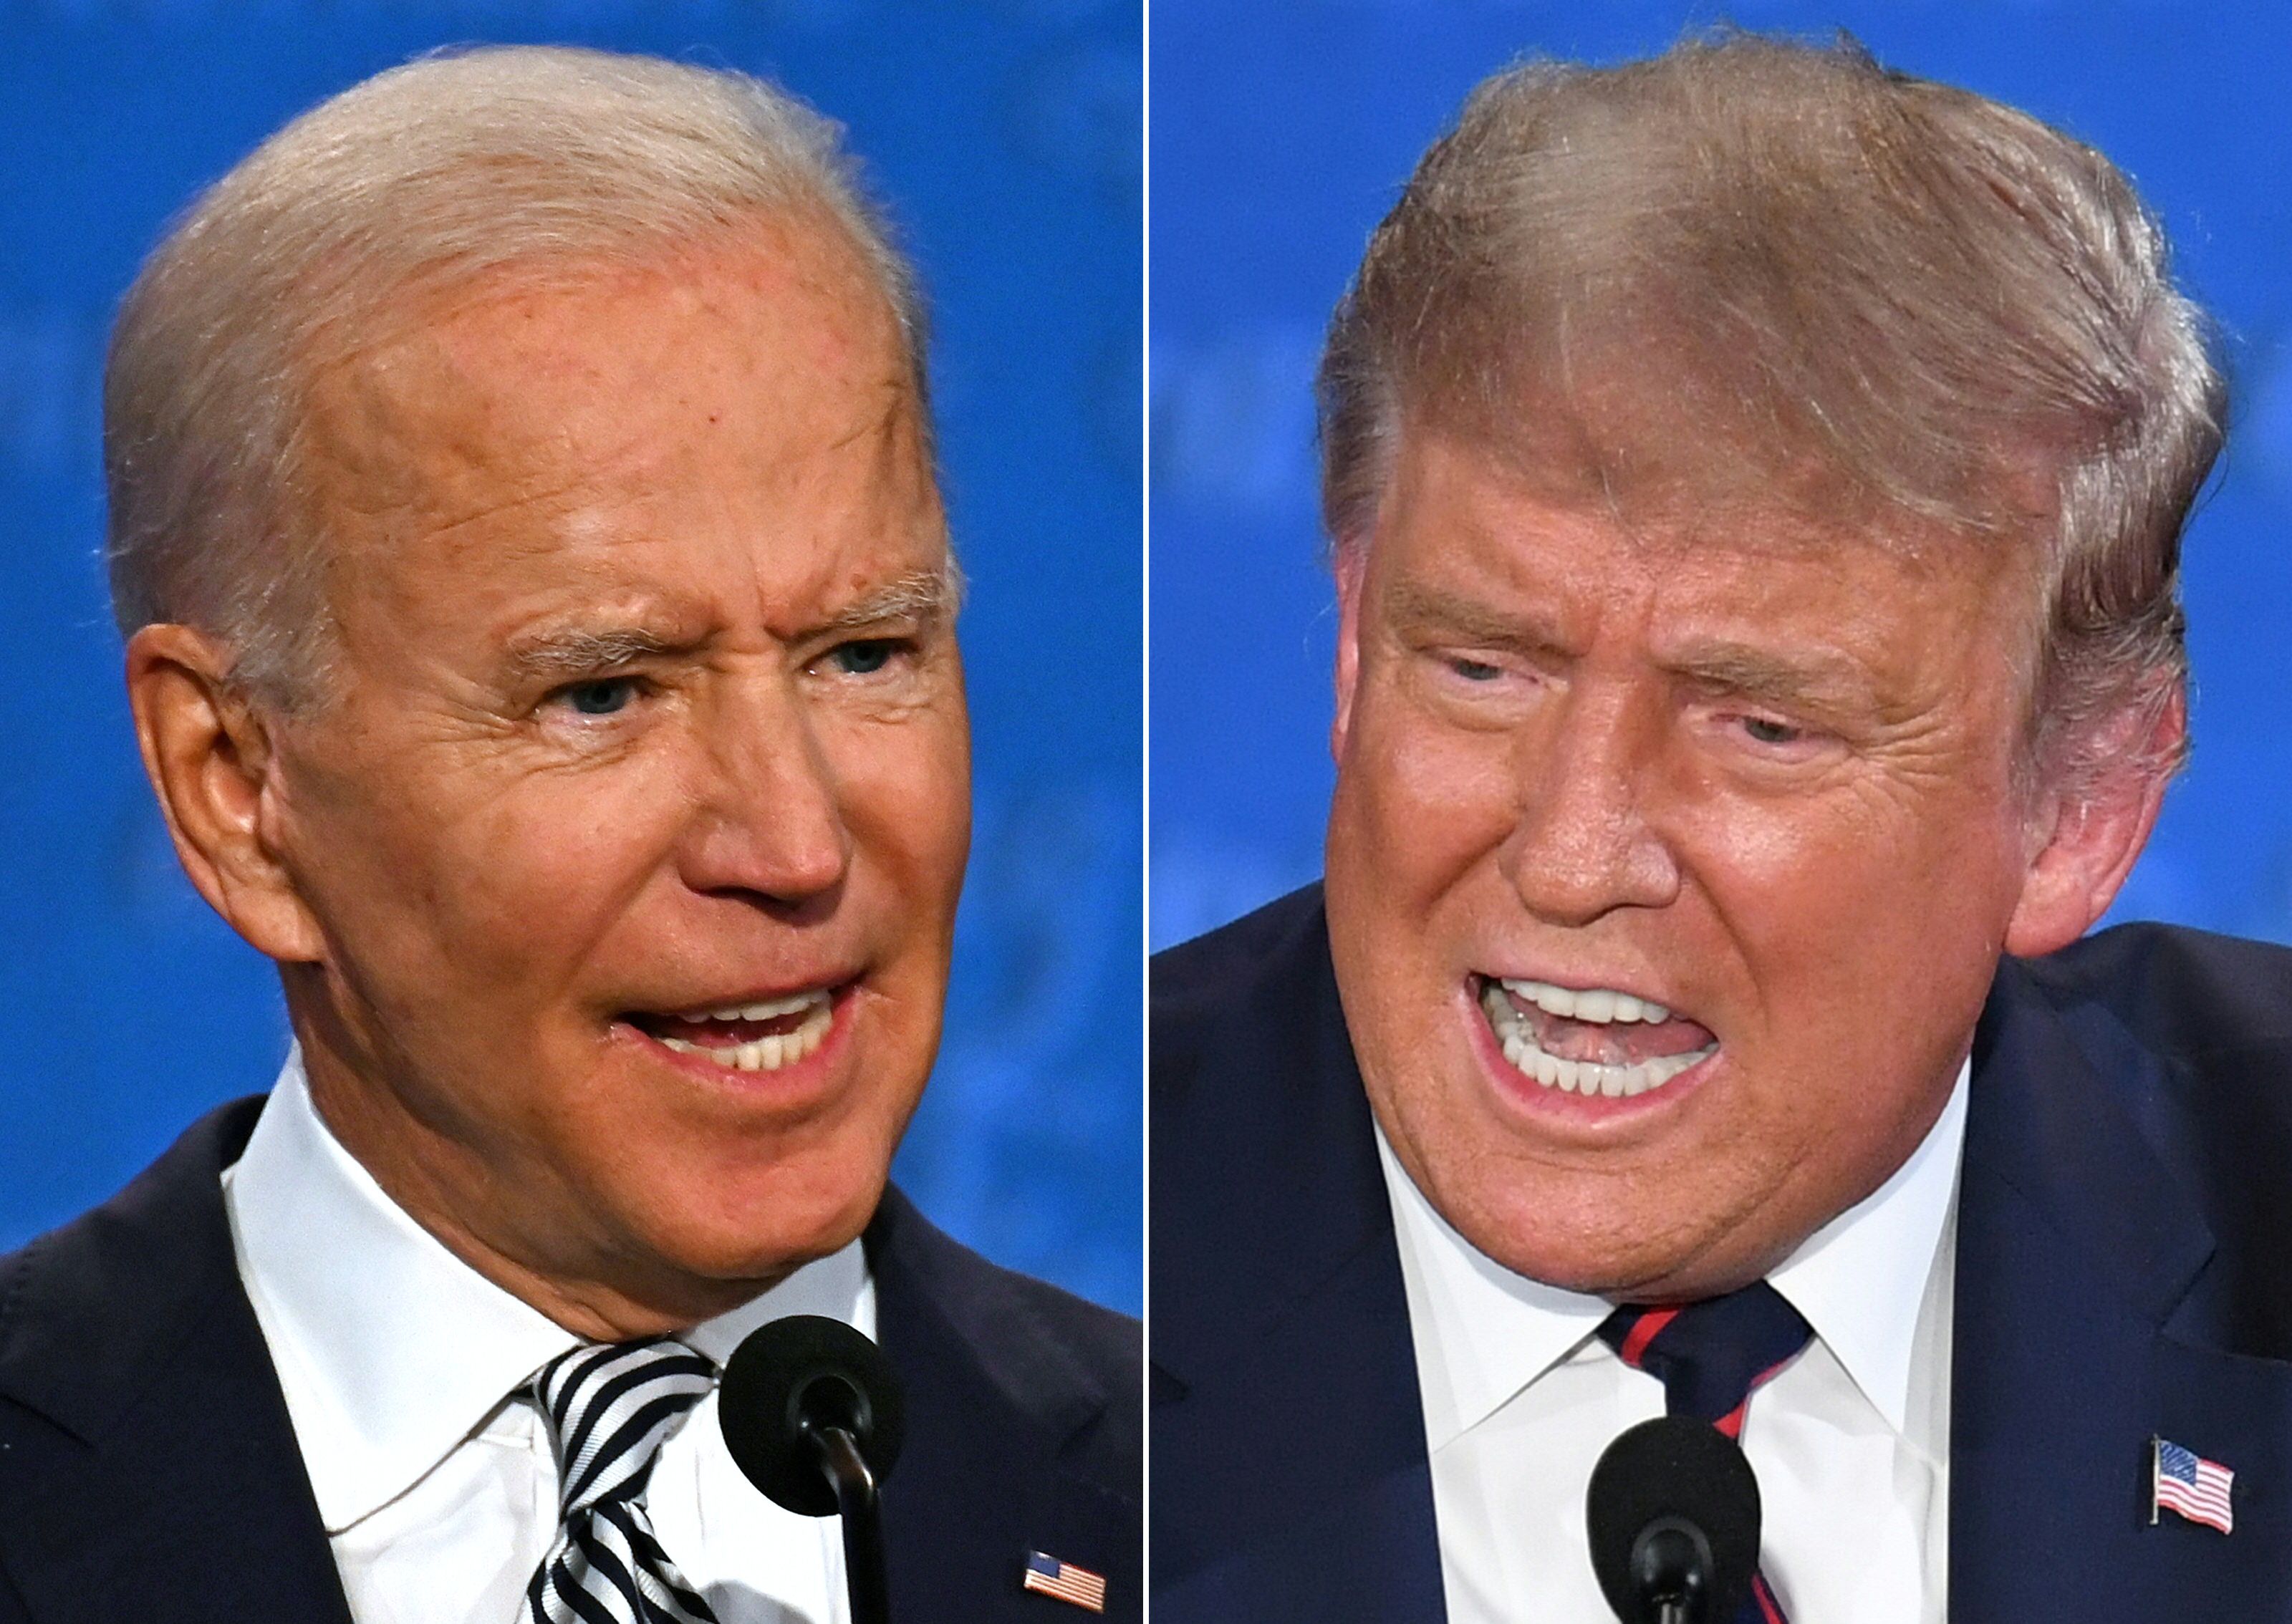 Donald Trump Calls for AG Barr to Indict Joe Biden With 26 Days Until Election